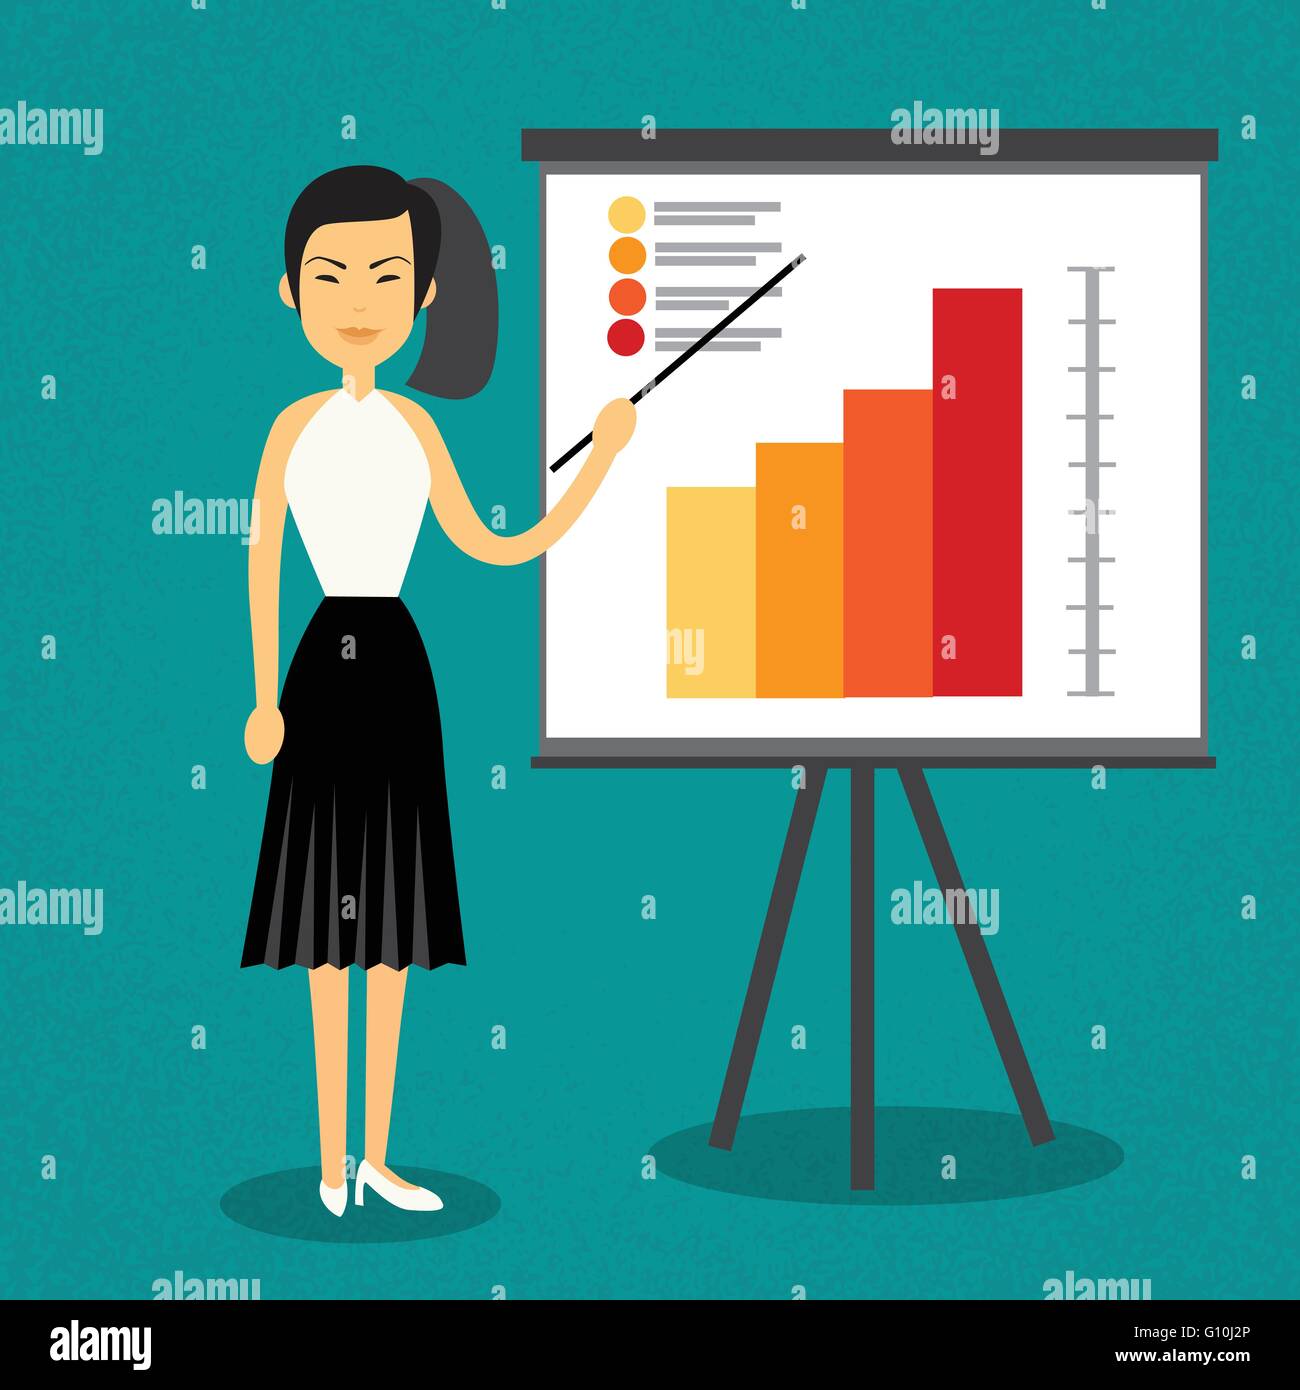 Asian Business Woman With Flip Chart Seminar Training Conference Brainstorming Presentation Financial Stock Vector